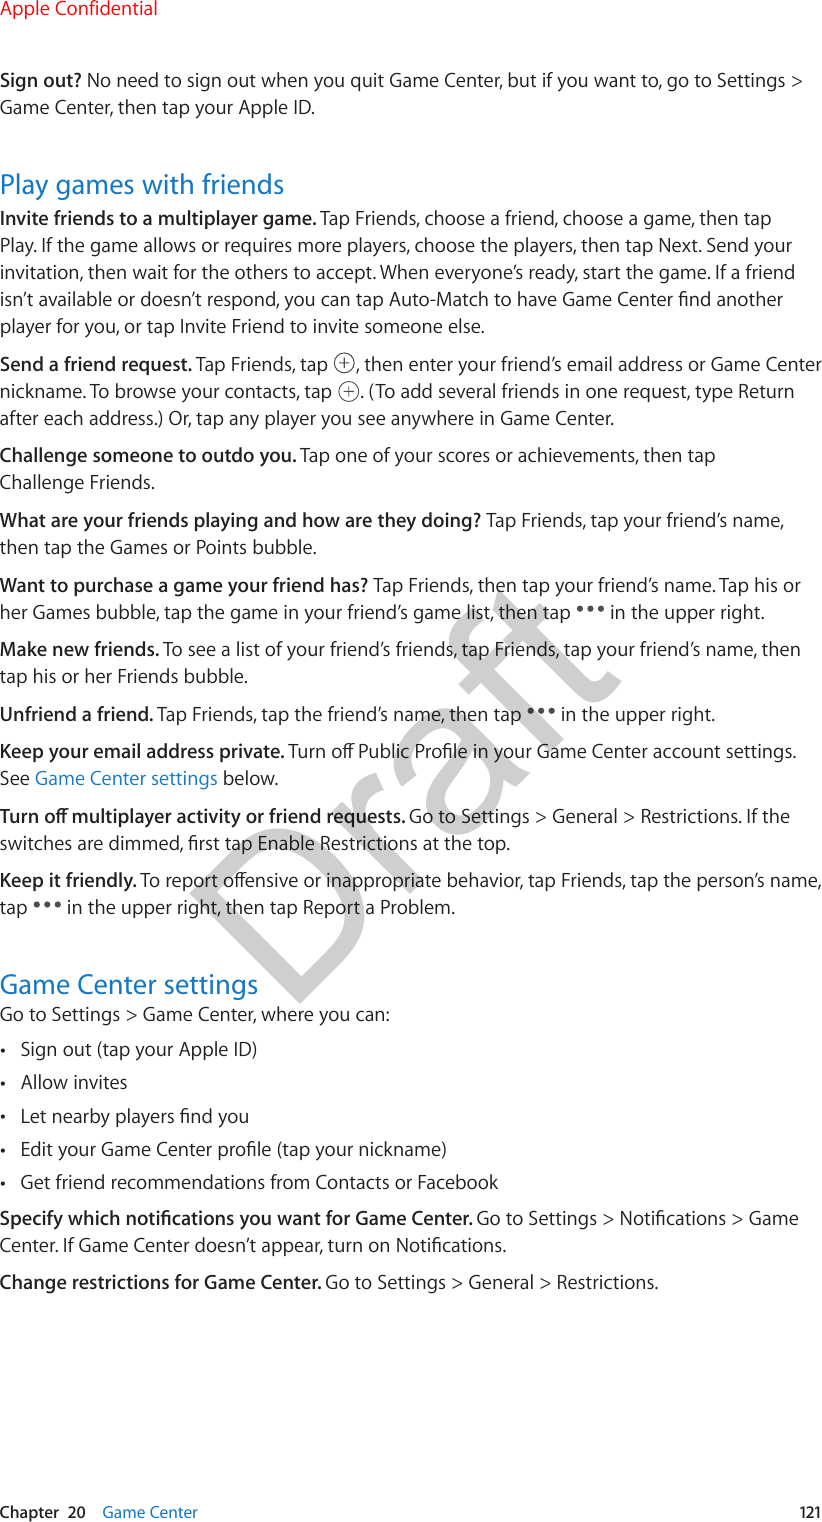 Chapter  20    Game Center  121Sign out? No need to sign out when you quit Game Center, but if you want to, go to Settings &gt; Game Center, then tap your Apple ID.Play games with friendsInvite friends to a multiplayer game. Tap Friends, choose a friend, choose a game, then tap Play. If the game allows or requires more players, choose the players, then tap Next. Send your invitation, then wait for the others to accept. When everyone’s ready, start the game. If a friend isn’t available or doesn’t respond, you can tap Auto-Match to have Game Center nd another player for you, or tap Invite Friend to invite someone else.Send a friend request. Tap Friends, tap  , then enter your friend’s email address or Game Center nickname. To browse your contacts, tap  . (To add several friends in one request, type Return after each address.) Or, tap any player you see anywhere in Game Center.Challenge someone to outdo you. Tap one of your scores or achievements, then tap Challenge Friends.What are your friends playing and how are they doing? Tap Friends, tap your friend’s name, then tap the Games or Points bubble.Want to purchase a game your friend has? Tap Friends, then tap your friend’s name. Tap his or her Games bubble, tap the game in your friend’s game list, then tap   in the upper right.Make new friends. To see a list of your friend’s friends, tap Friends, tap your friend’s name, then tap his or her Friends bubble.Unfriend a friend. Tap Friends, tap the friend’s name, then tap   in the upper right.Keep your email address private. Turn o Public Prole in your Game Center account settings. See Game Center settings below.Turn o multiplayer activity or friend requests. Go to Settings &gt; General &gt; Restrictions. If the switches are dimmed, rst tap Enable Restrictions at the top.Keep it friendly. To report oensive or inappropriate behavior, tap Friends, tap the person’s name, tap   in the upper right, then tap Report a Problem.Game Center settingsGo to Settings &gt; Game Center, where you can: •Sign out (tap your Apple ID) •Allow invites •Let nearby players nd you •Edit your Game Center prole (tap your nickname) •Get friend recommendations from Contacts or FacebookSpecify which notications you want for Game Center. Go to Settings &gt; Notications &gt; Game Center. If Game Center doesn’t appear, turn on Notications.Change restrictions for Game Center. Go to Settings &gt; General &gt; Restrictions.Apple ConfidentialDraft